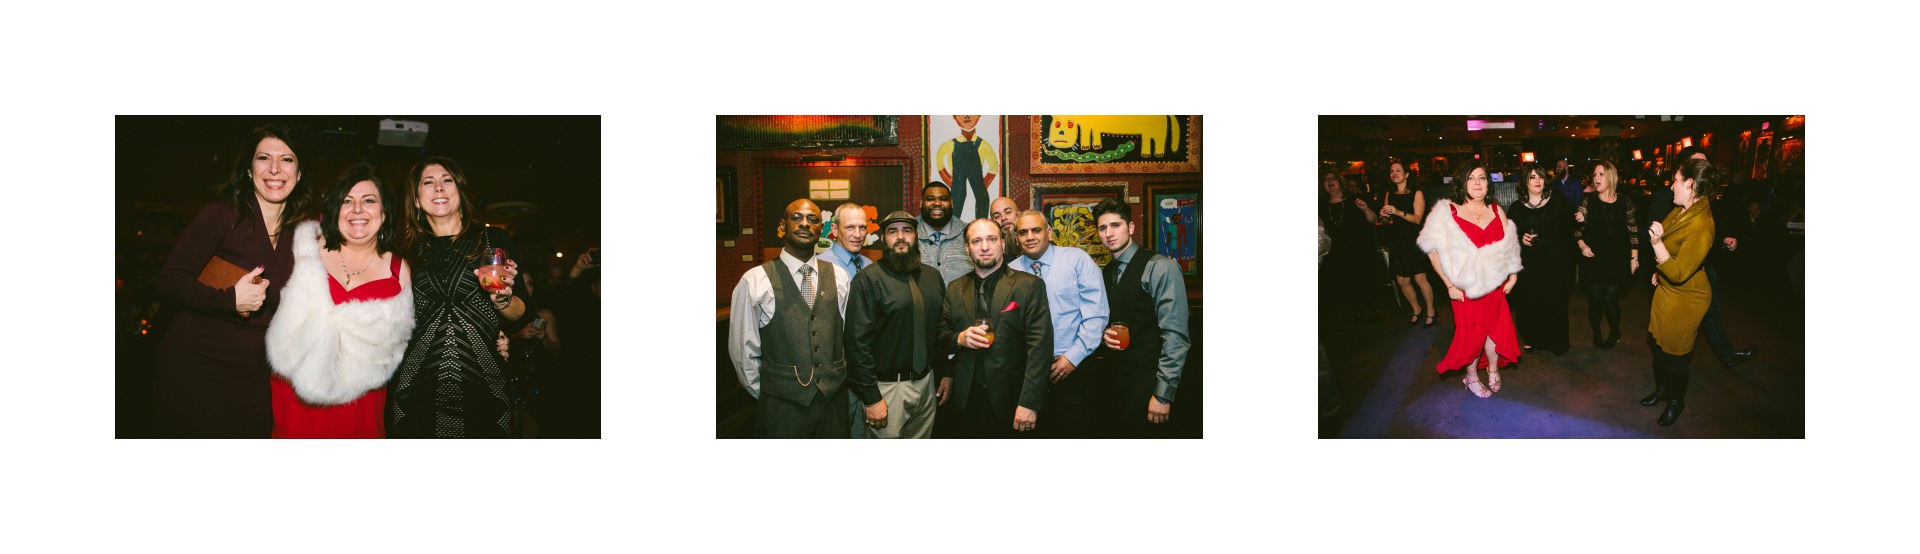 House of Blues Wedding Photographer in Downtown Cleveland 2 36.jpg